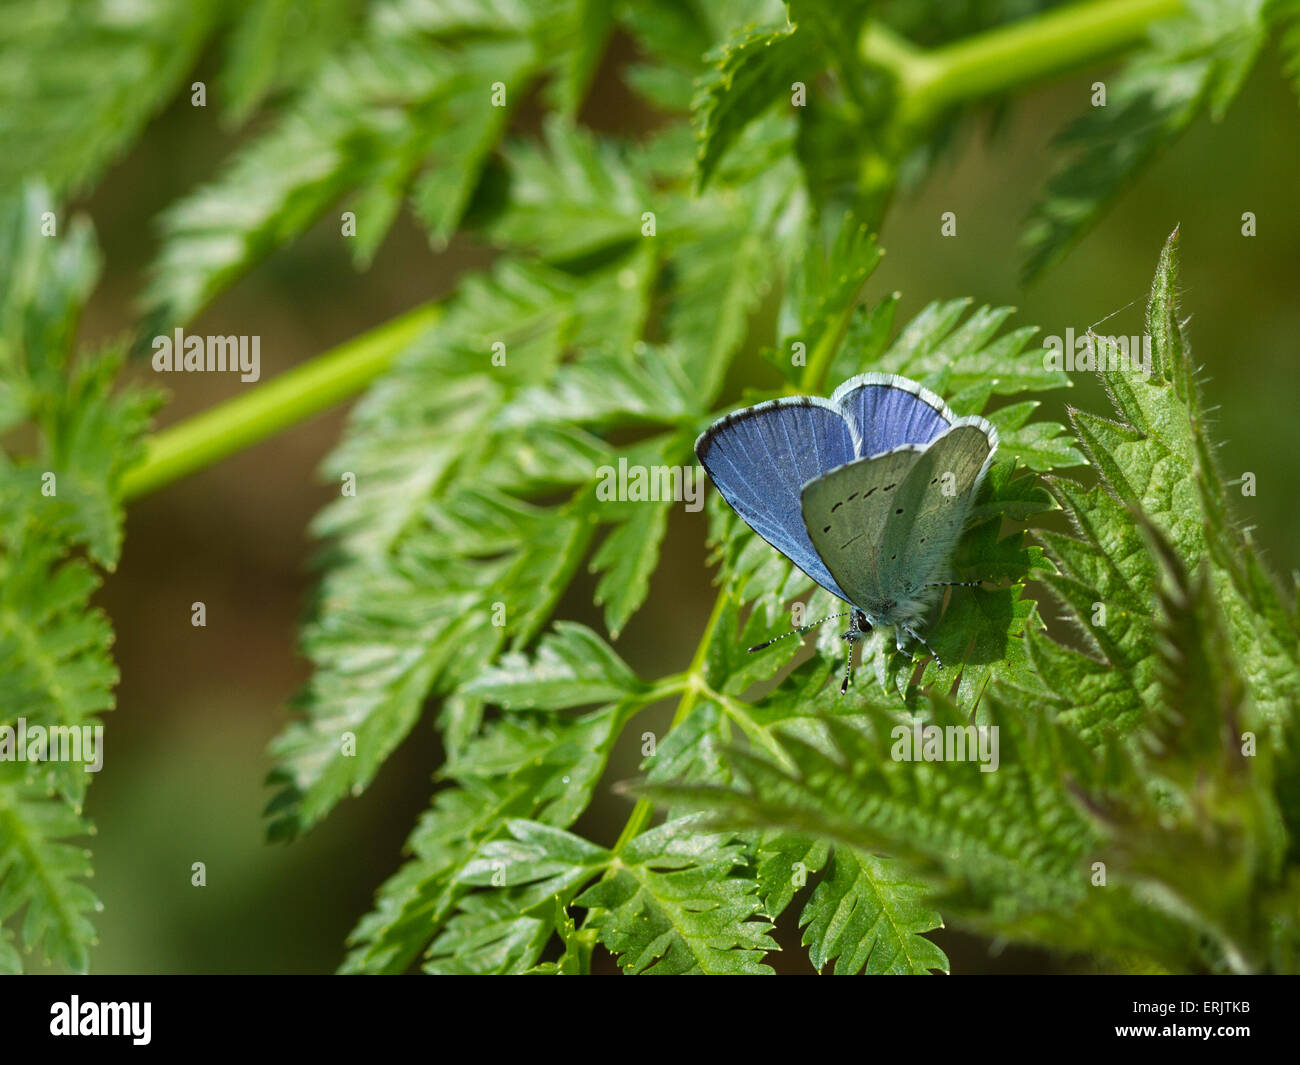 A male Holly Blue butterfly on vegetation Stock Photo